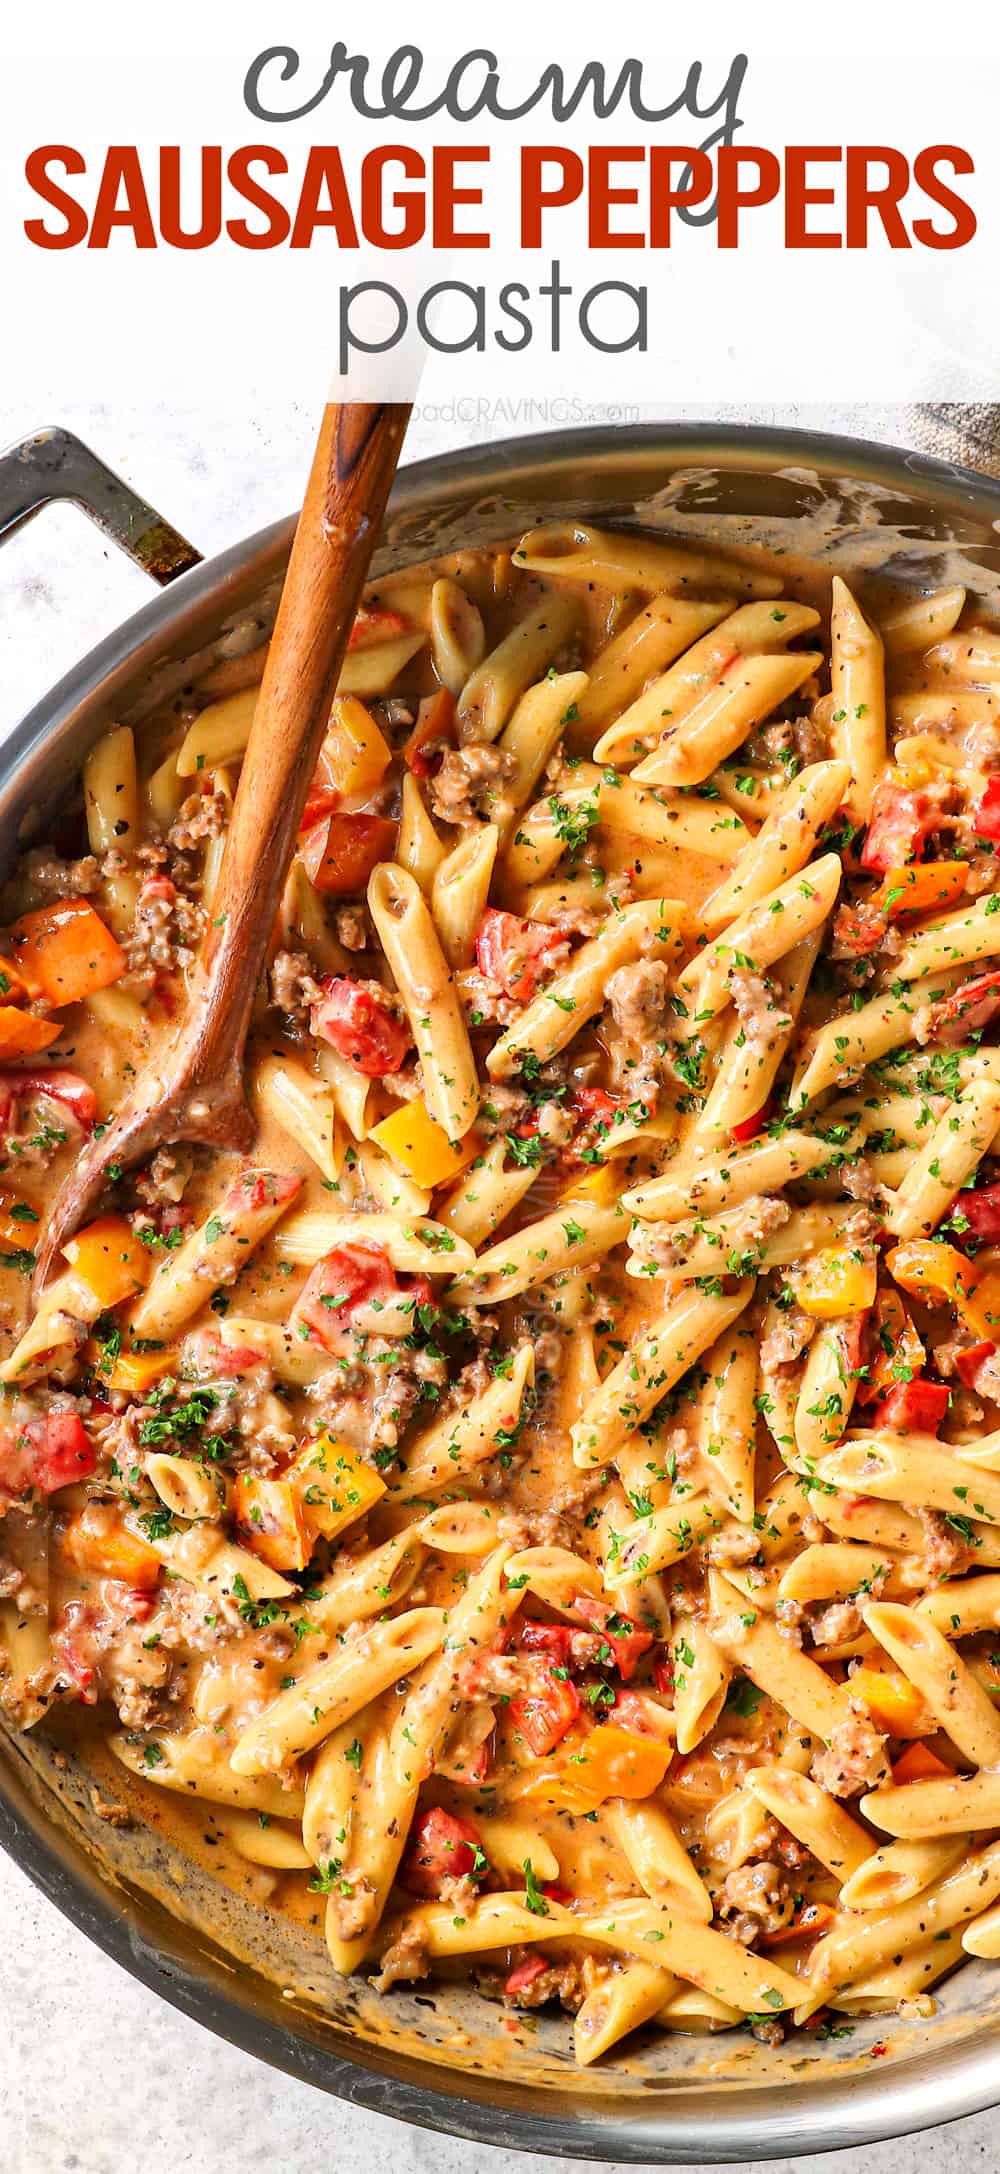 showing how to make sausage pepper pasta in a skillet with Italian sausage and bell peppers